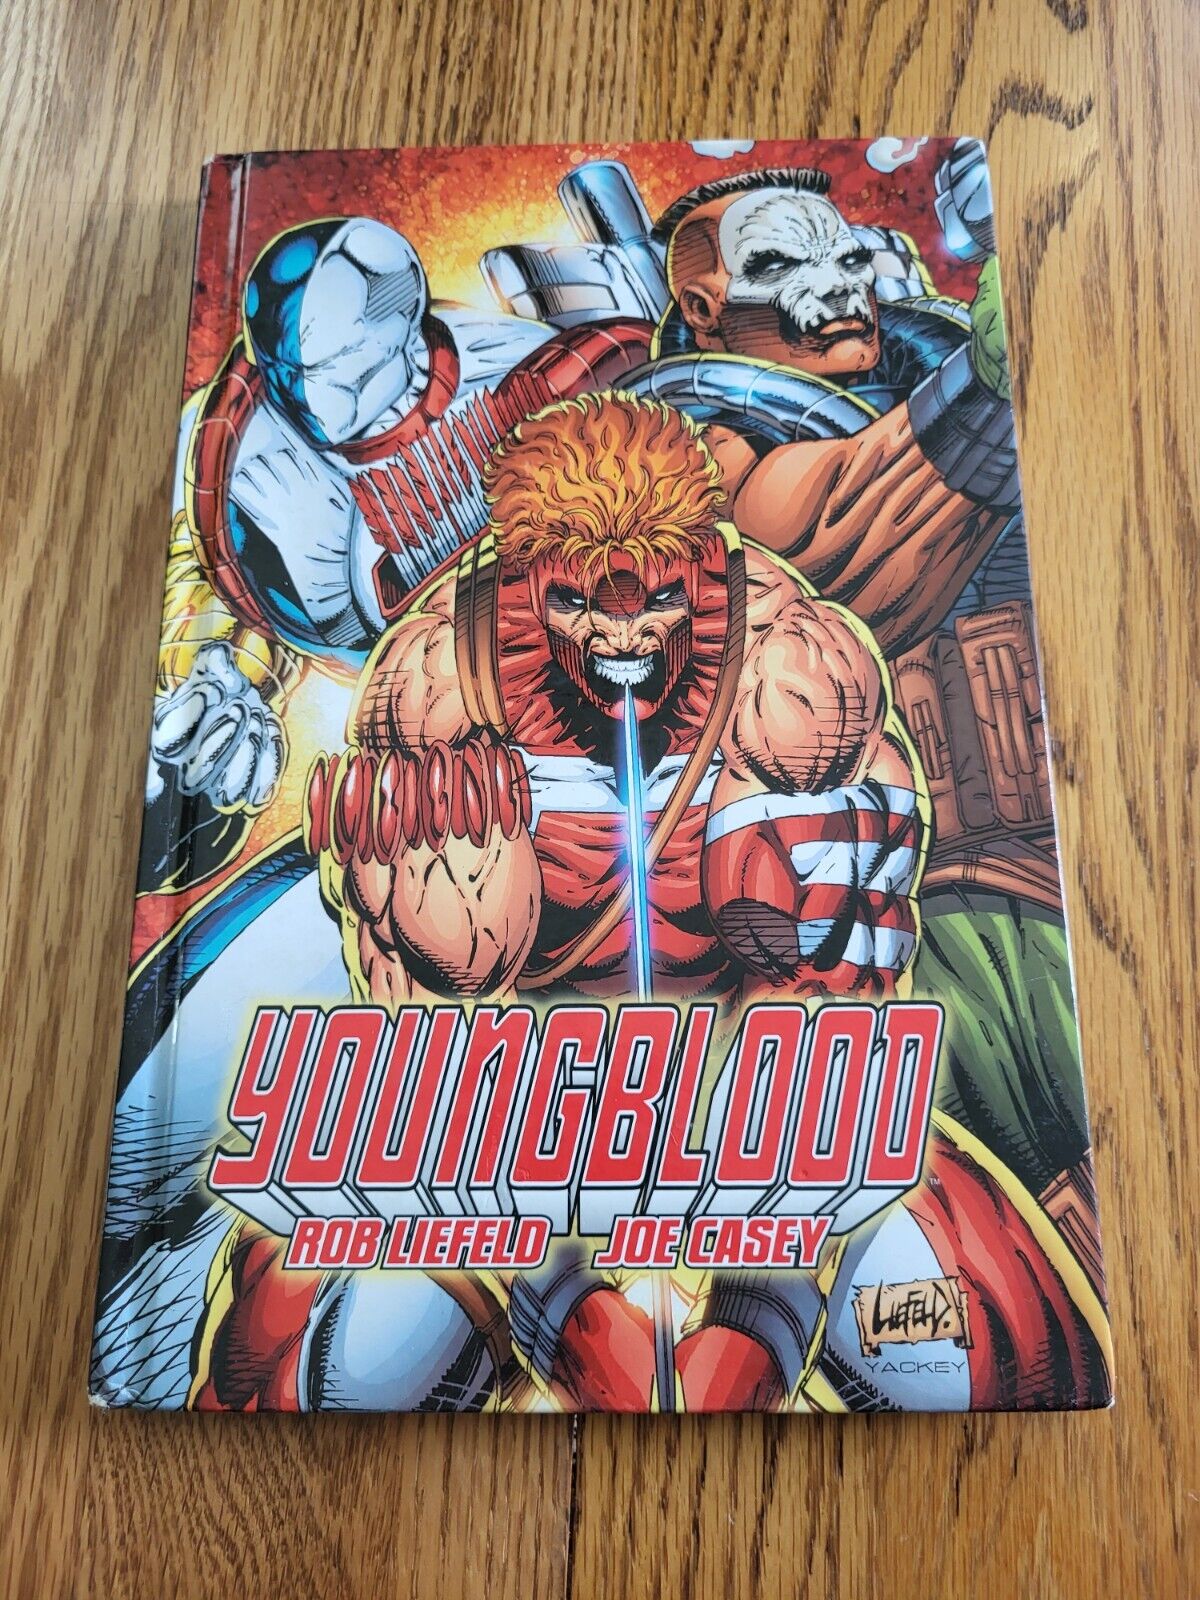 Image Comics Youngblood by Rob Liefeld & Joe Casey - Volume 1 (Hardcover, 2008)